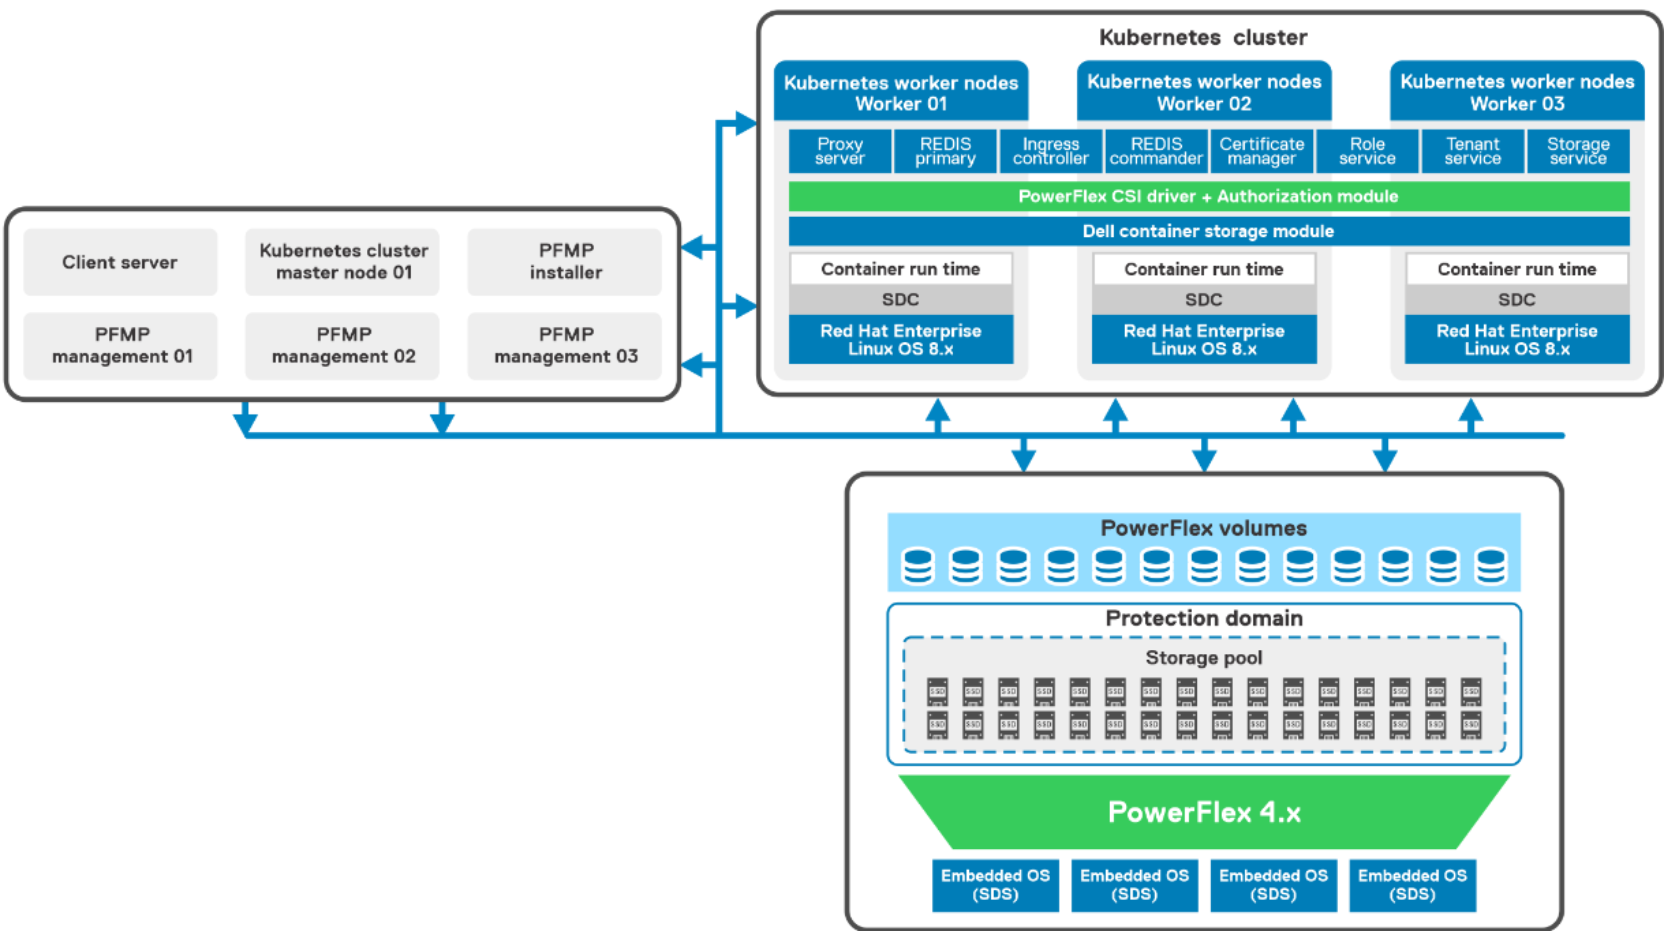 This figure shows a logical design of the Kubernetes cluster with PowerFlex.